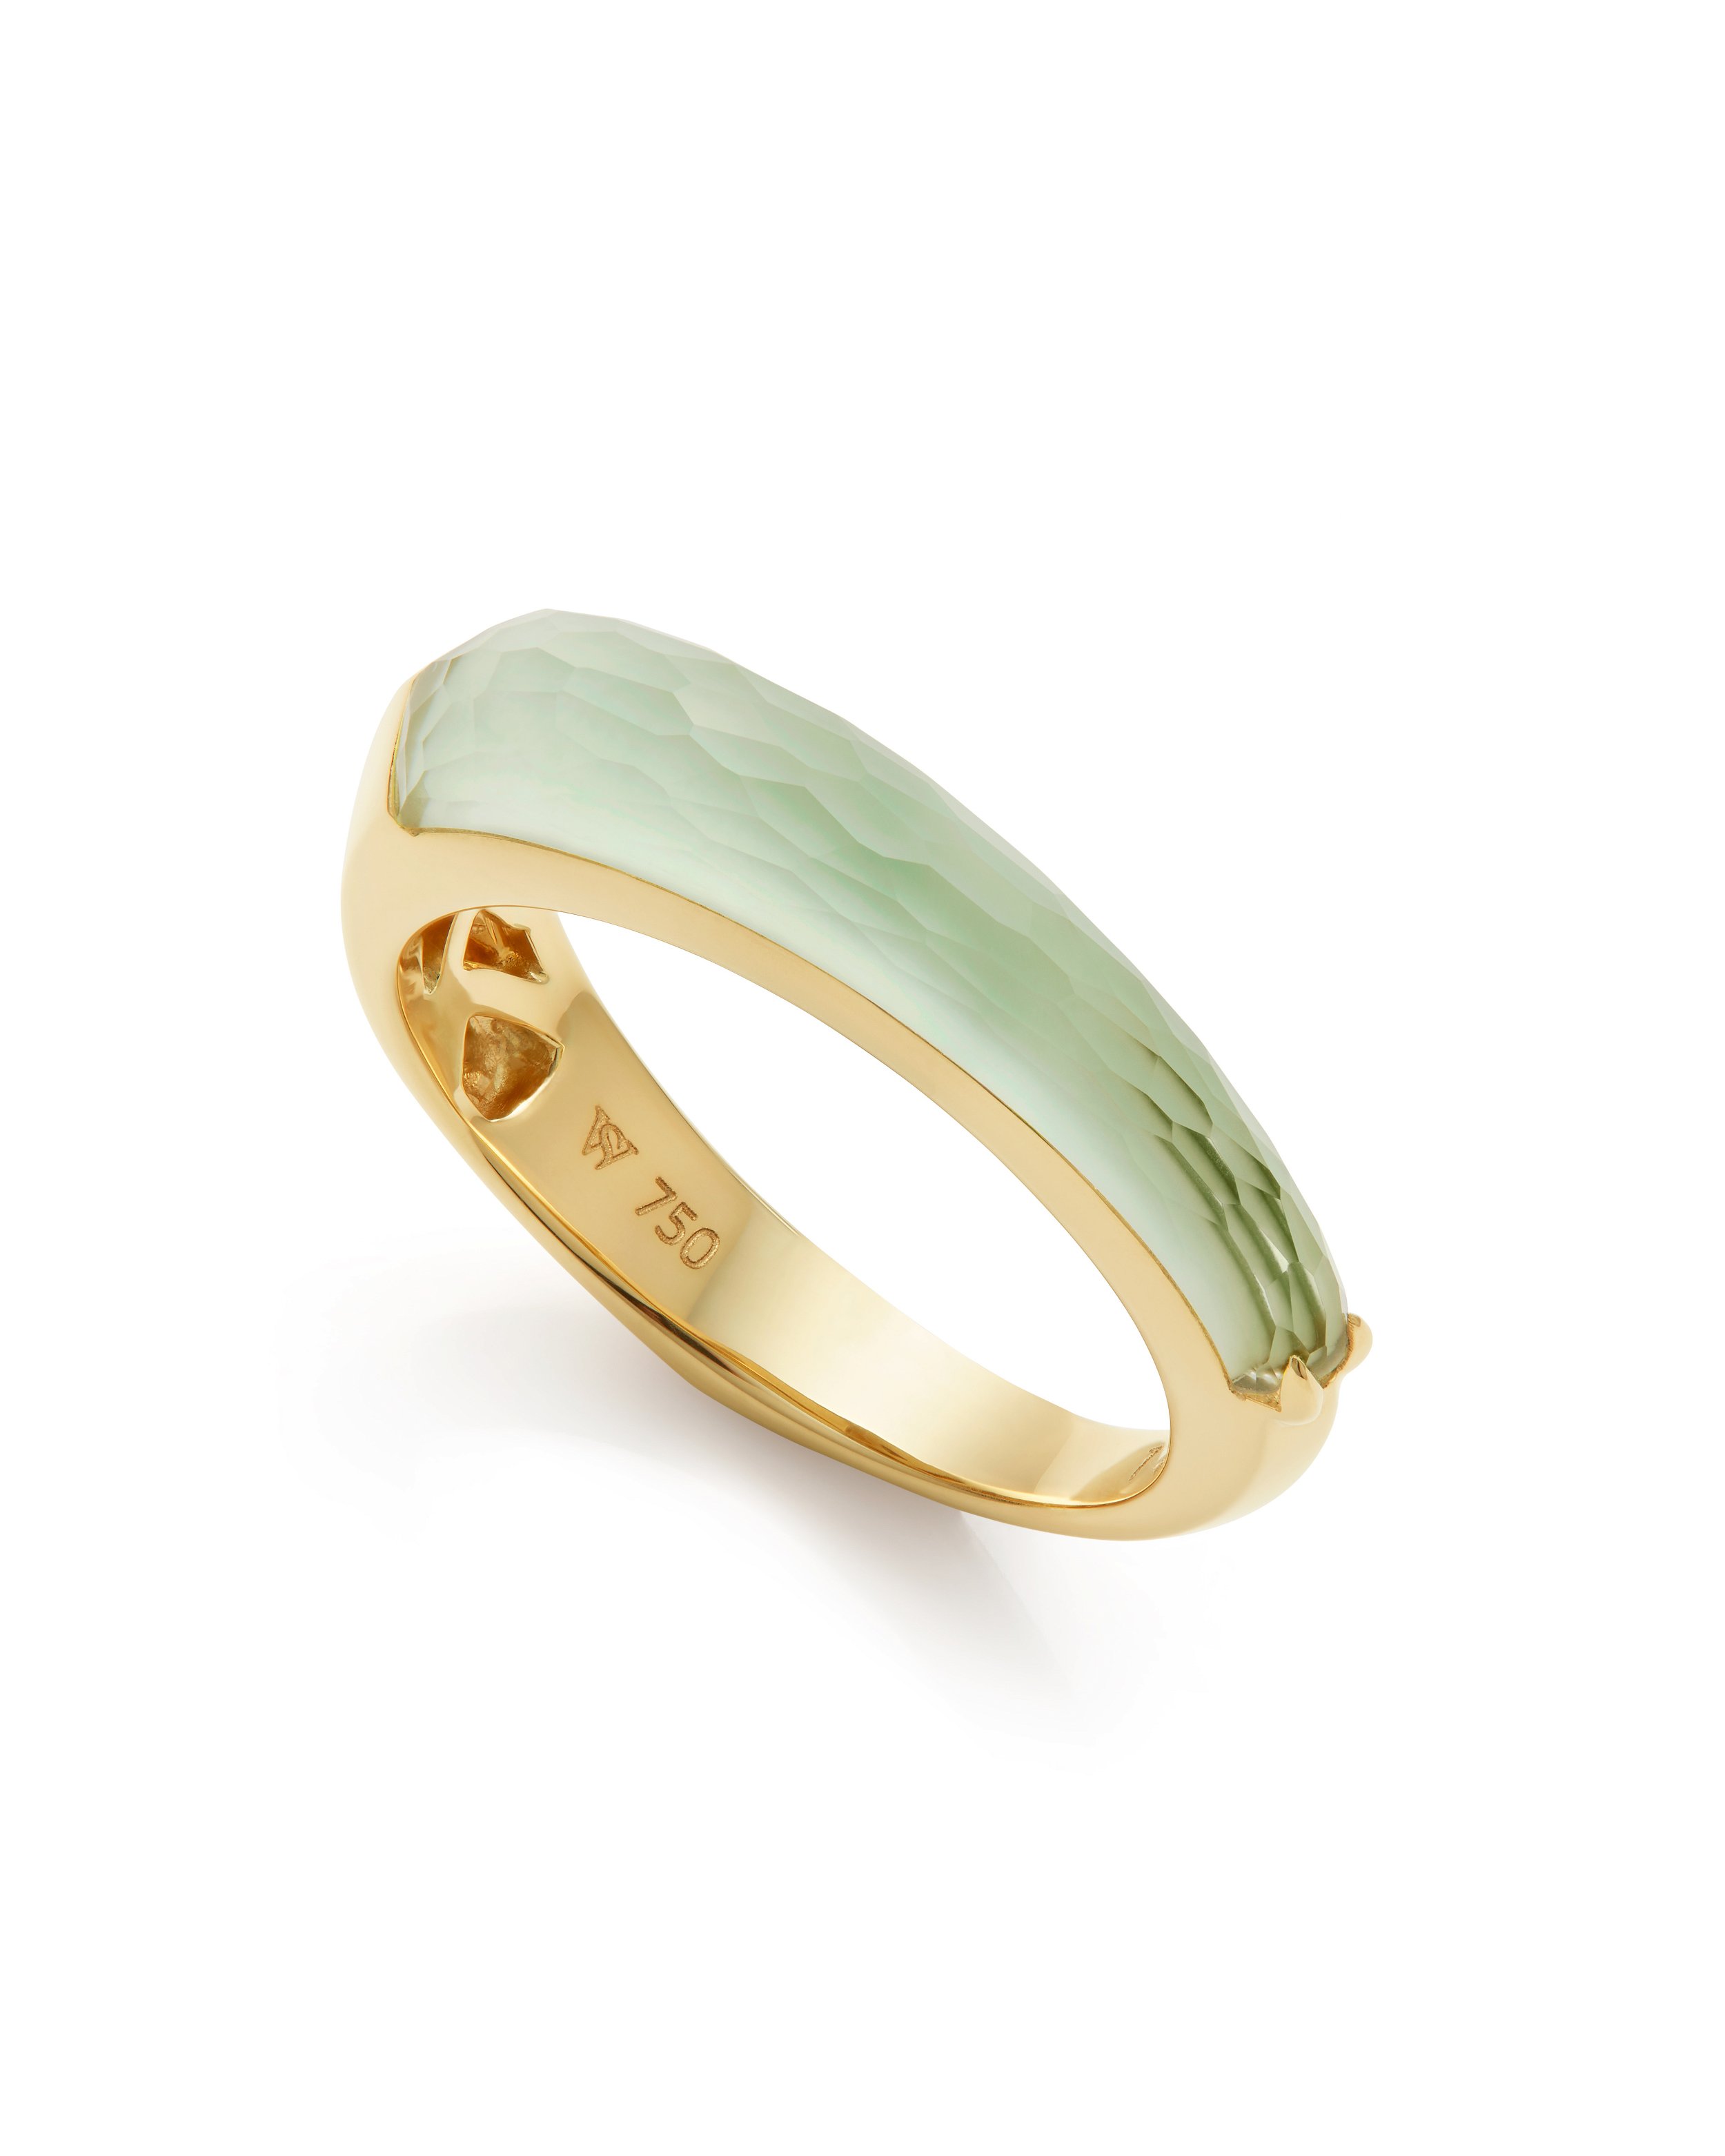 CH2 Shard Stack Ring with Chrysolemon in 18kt Yellow Gold - Size 7